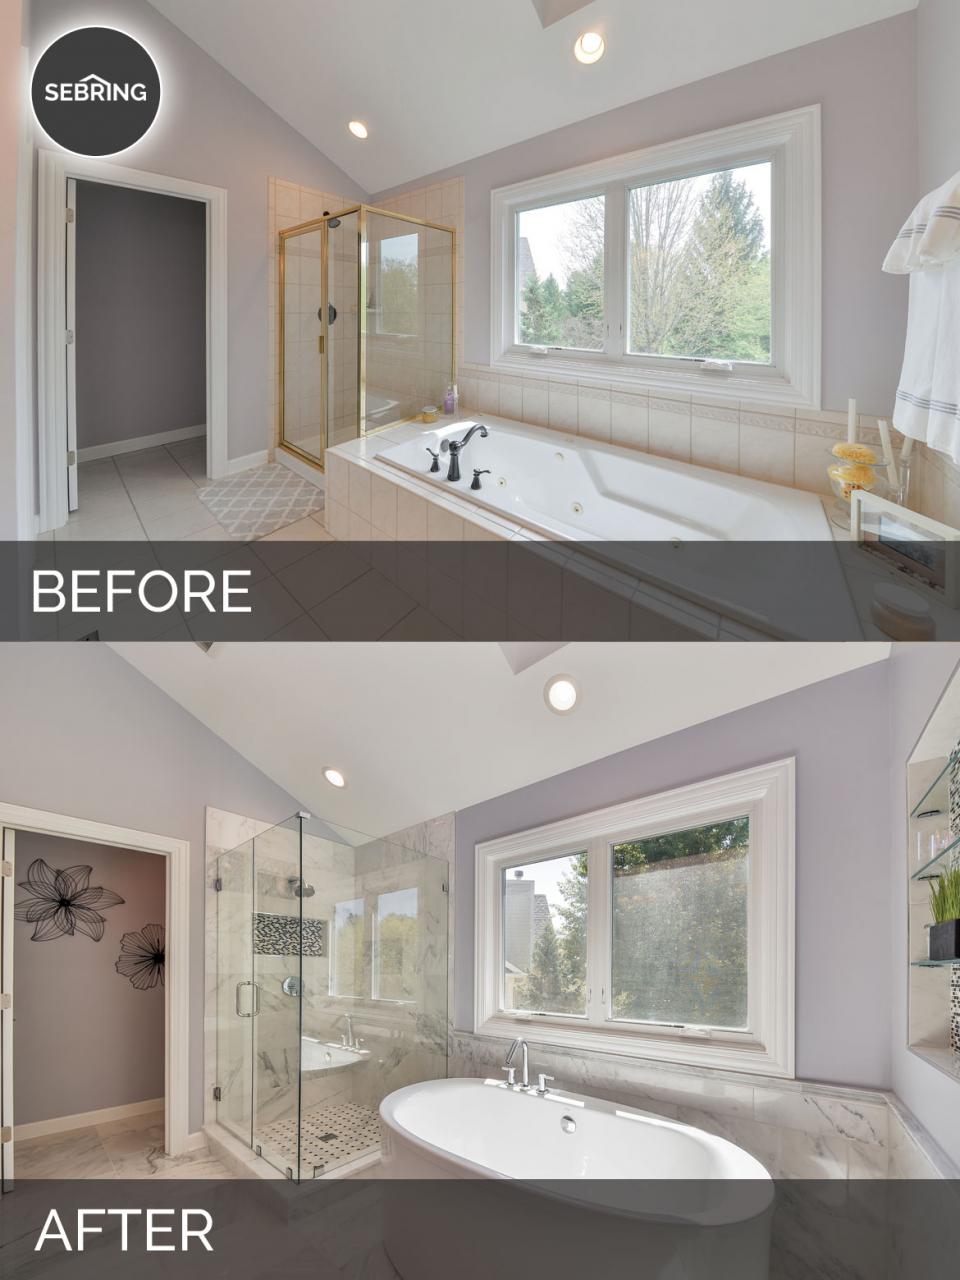 Doug & Natalie's Master Bath Before & After Pictures Home Remodeling